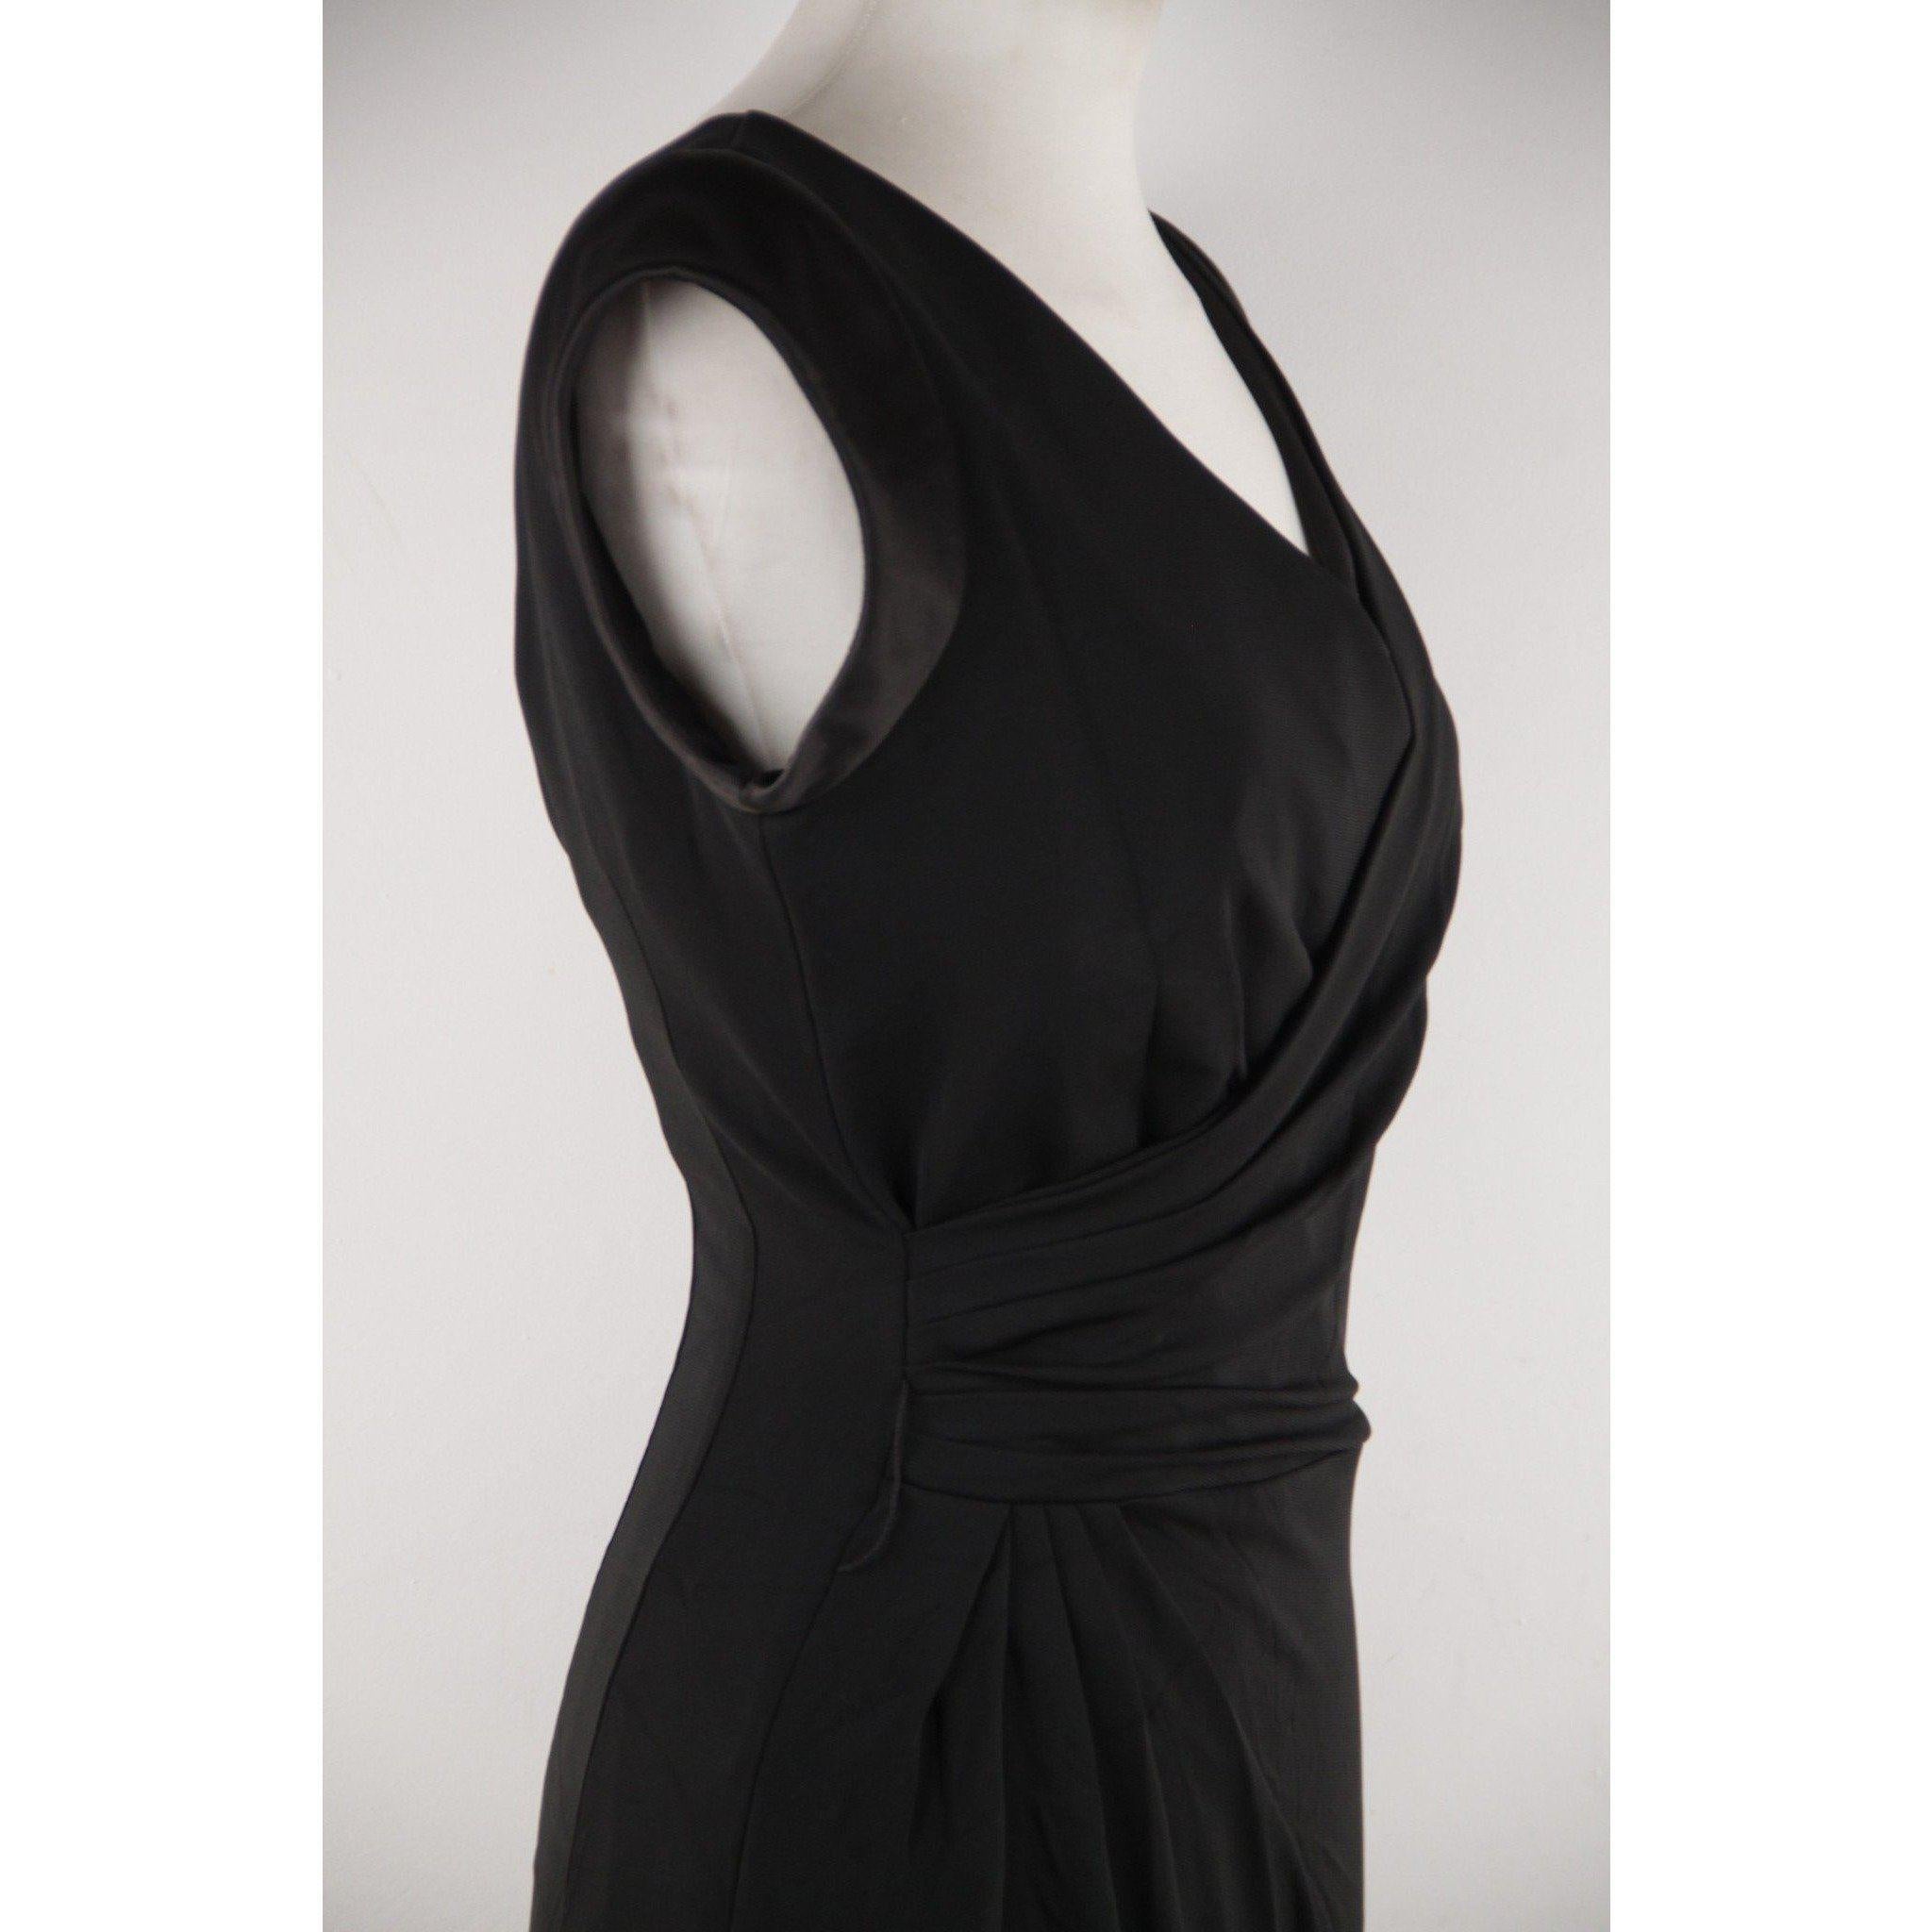 VERSACE V Neck LITTLE BLACK DRESS Sheath w/ Drape Front SIZE 40 In Excellent Condition In Rome, Rome